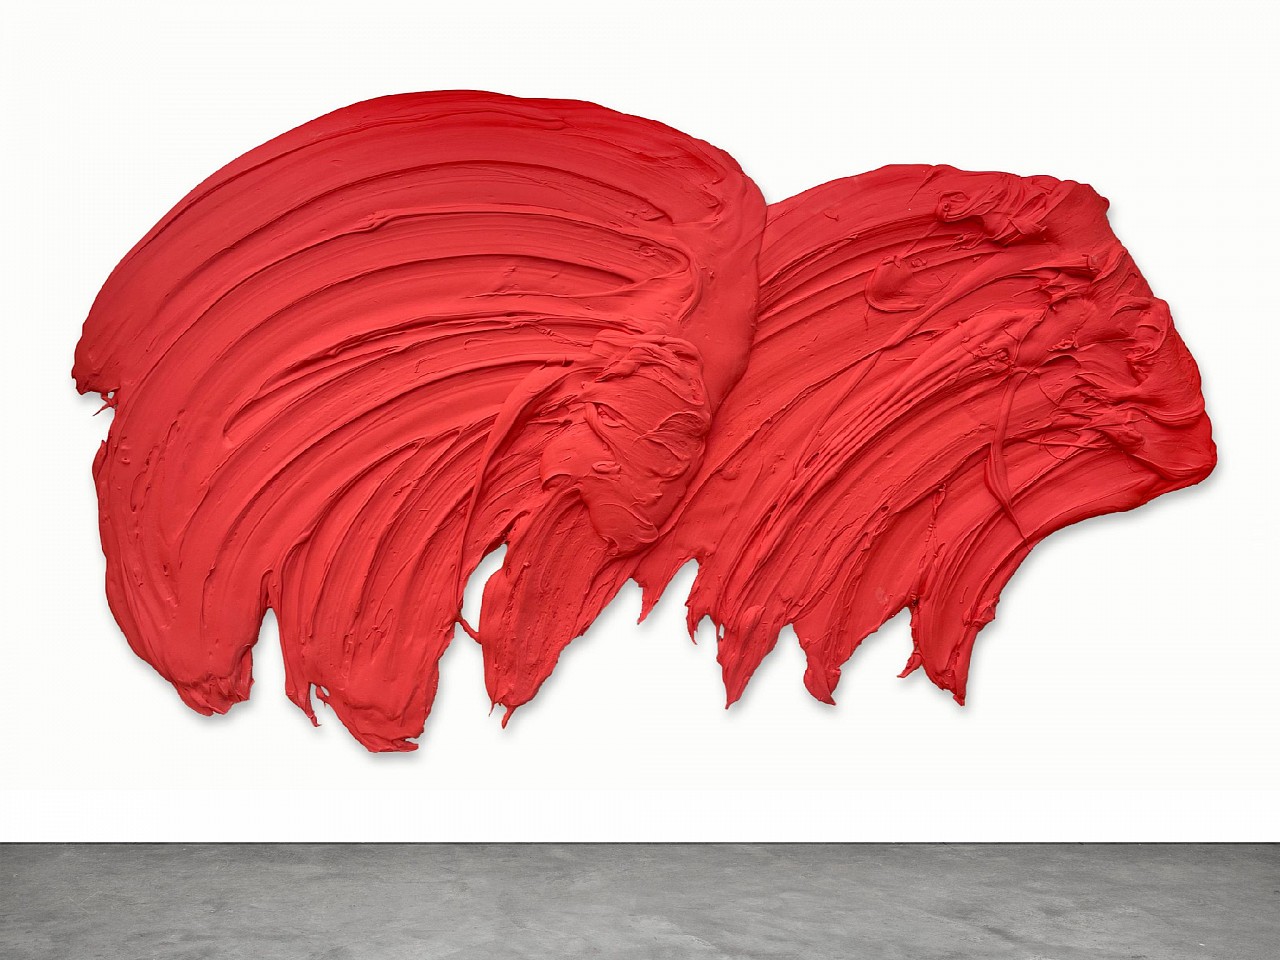 Donald Martiny, Apali, 2013
polymer and pigment on aluminum, 48 x 82 in.
MART00138